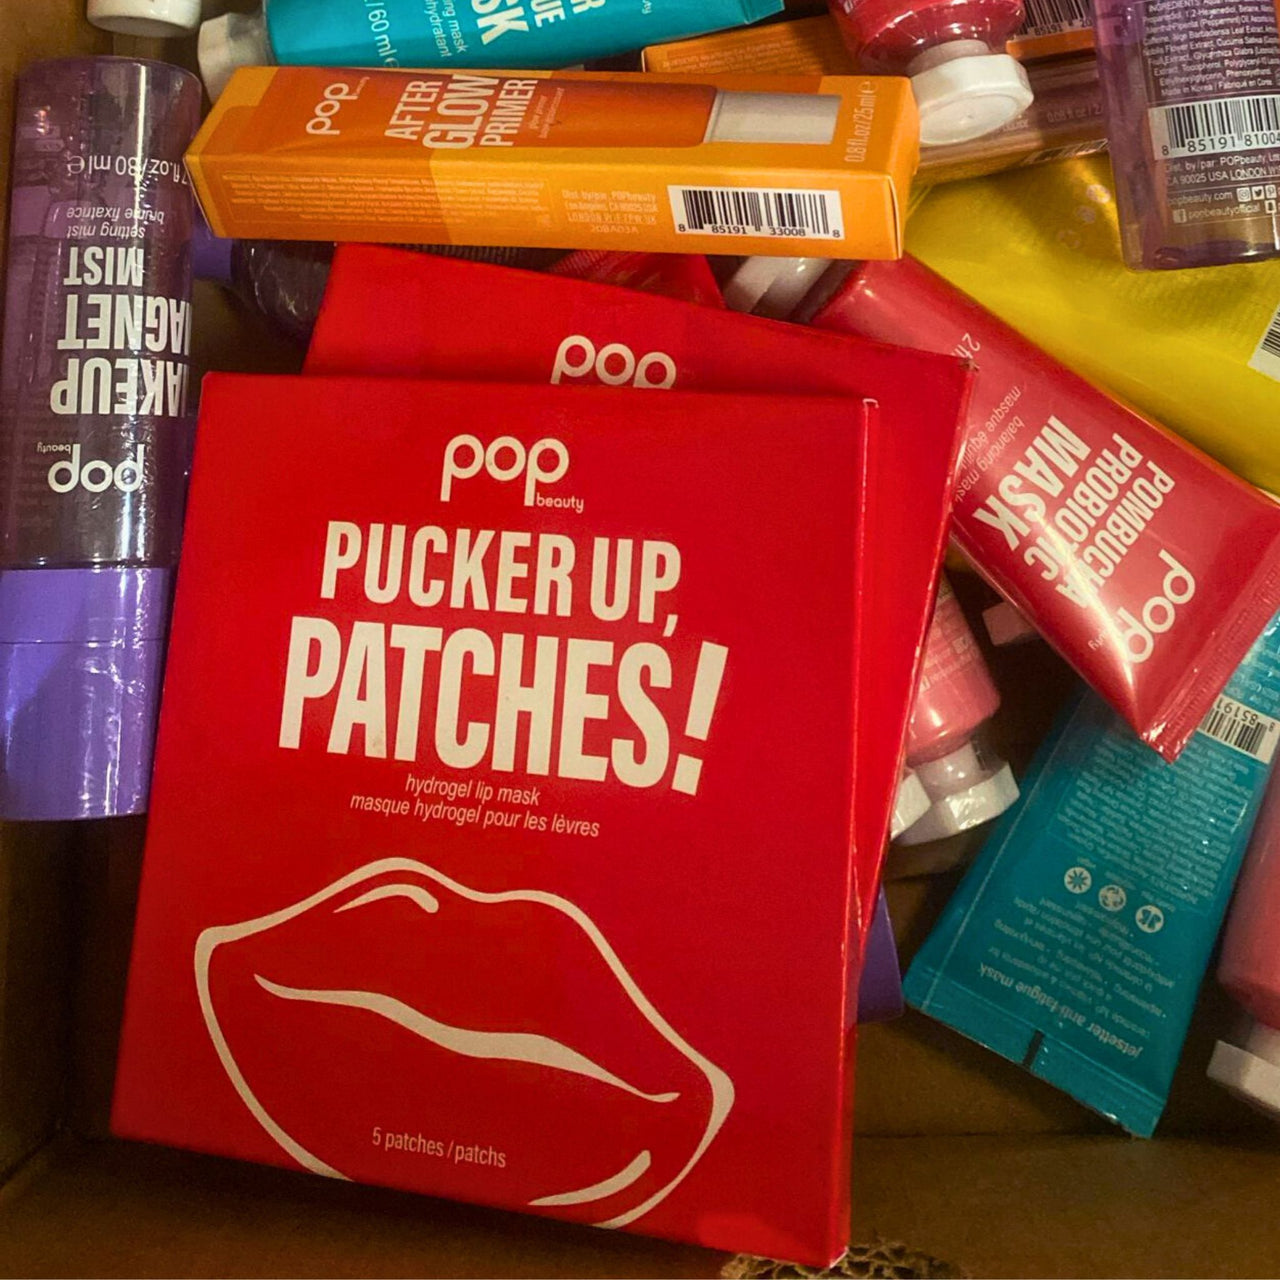 Pop Beauty Assorted Mix includes Skincare & Makeup Products 